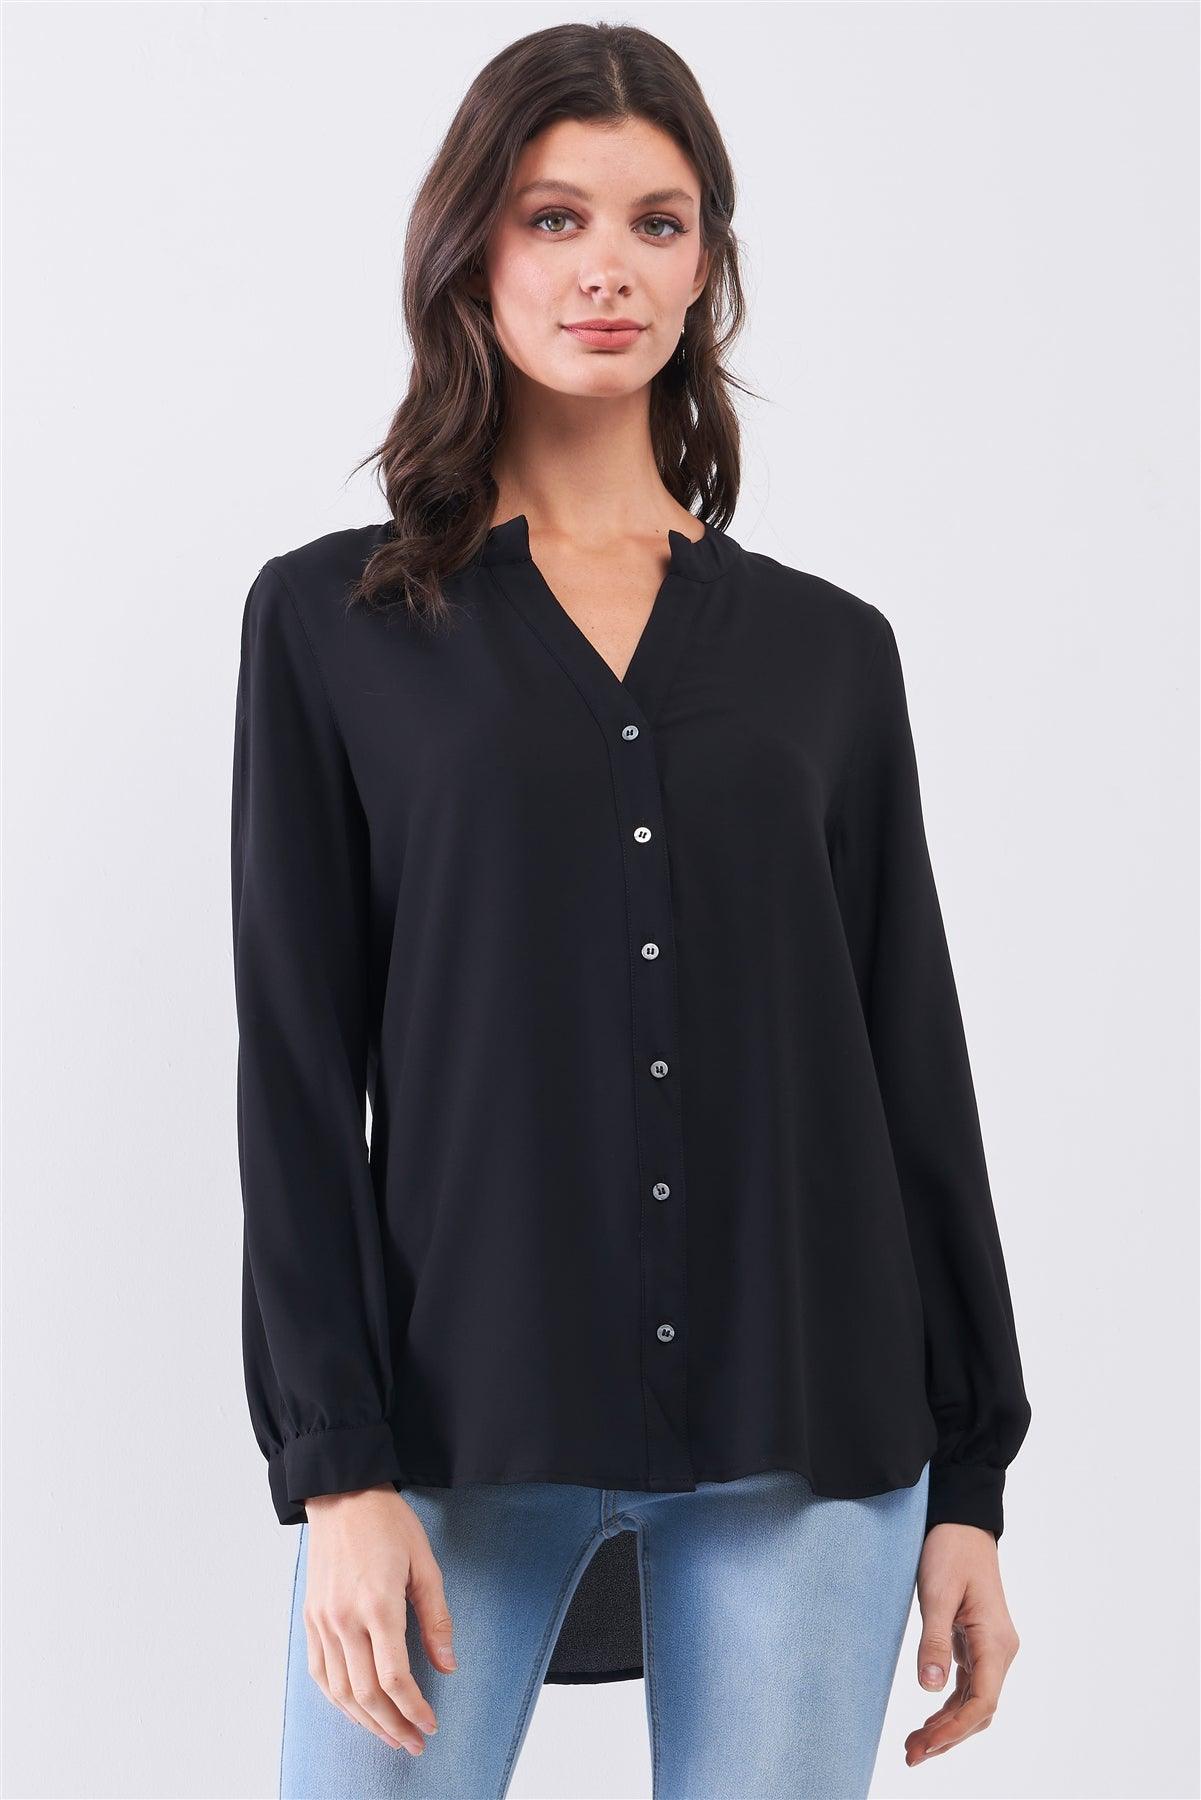 Black Asymmetrical Long Sleeve Button-Up Front Relaxed Shirt /1-3-2